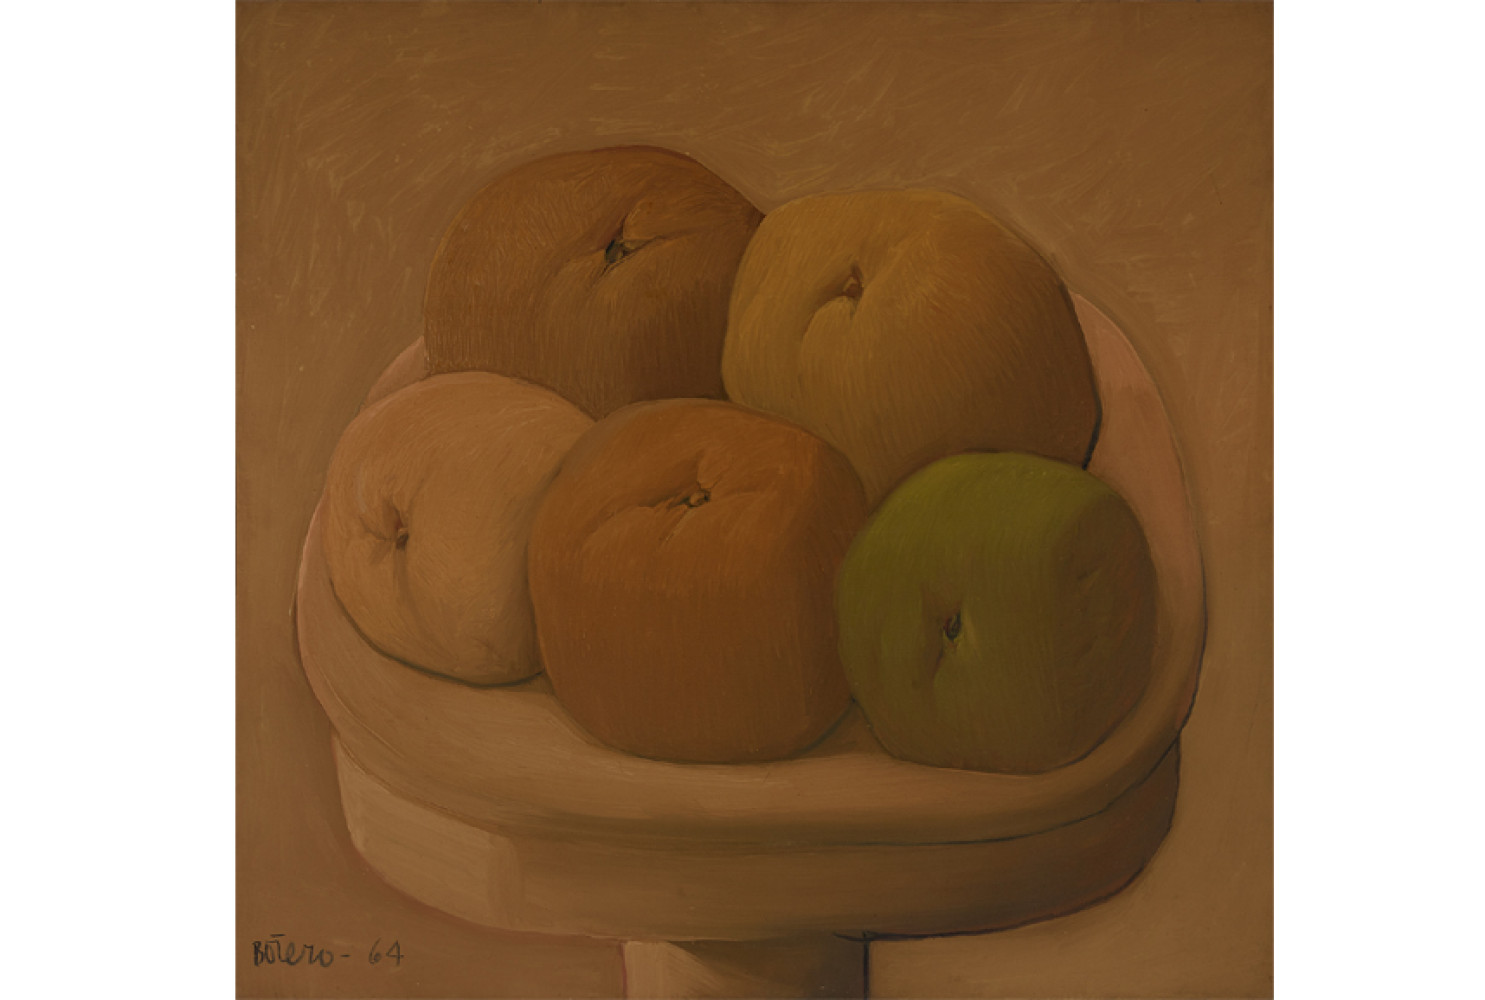 Las frutas (The Fruits), 1964, by Fernando Botero (Columbian, b. 1932); oil on canvas; 50 3/4 x 52 1/8 inches; Courtesy of the Lowe Art Museum, University of Miami and International Arts & Artists
